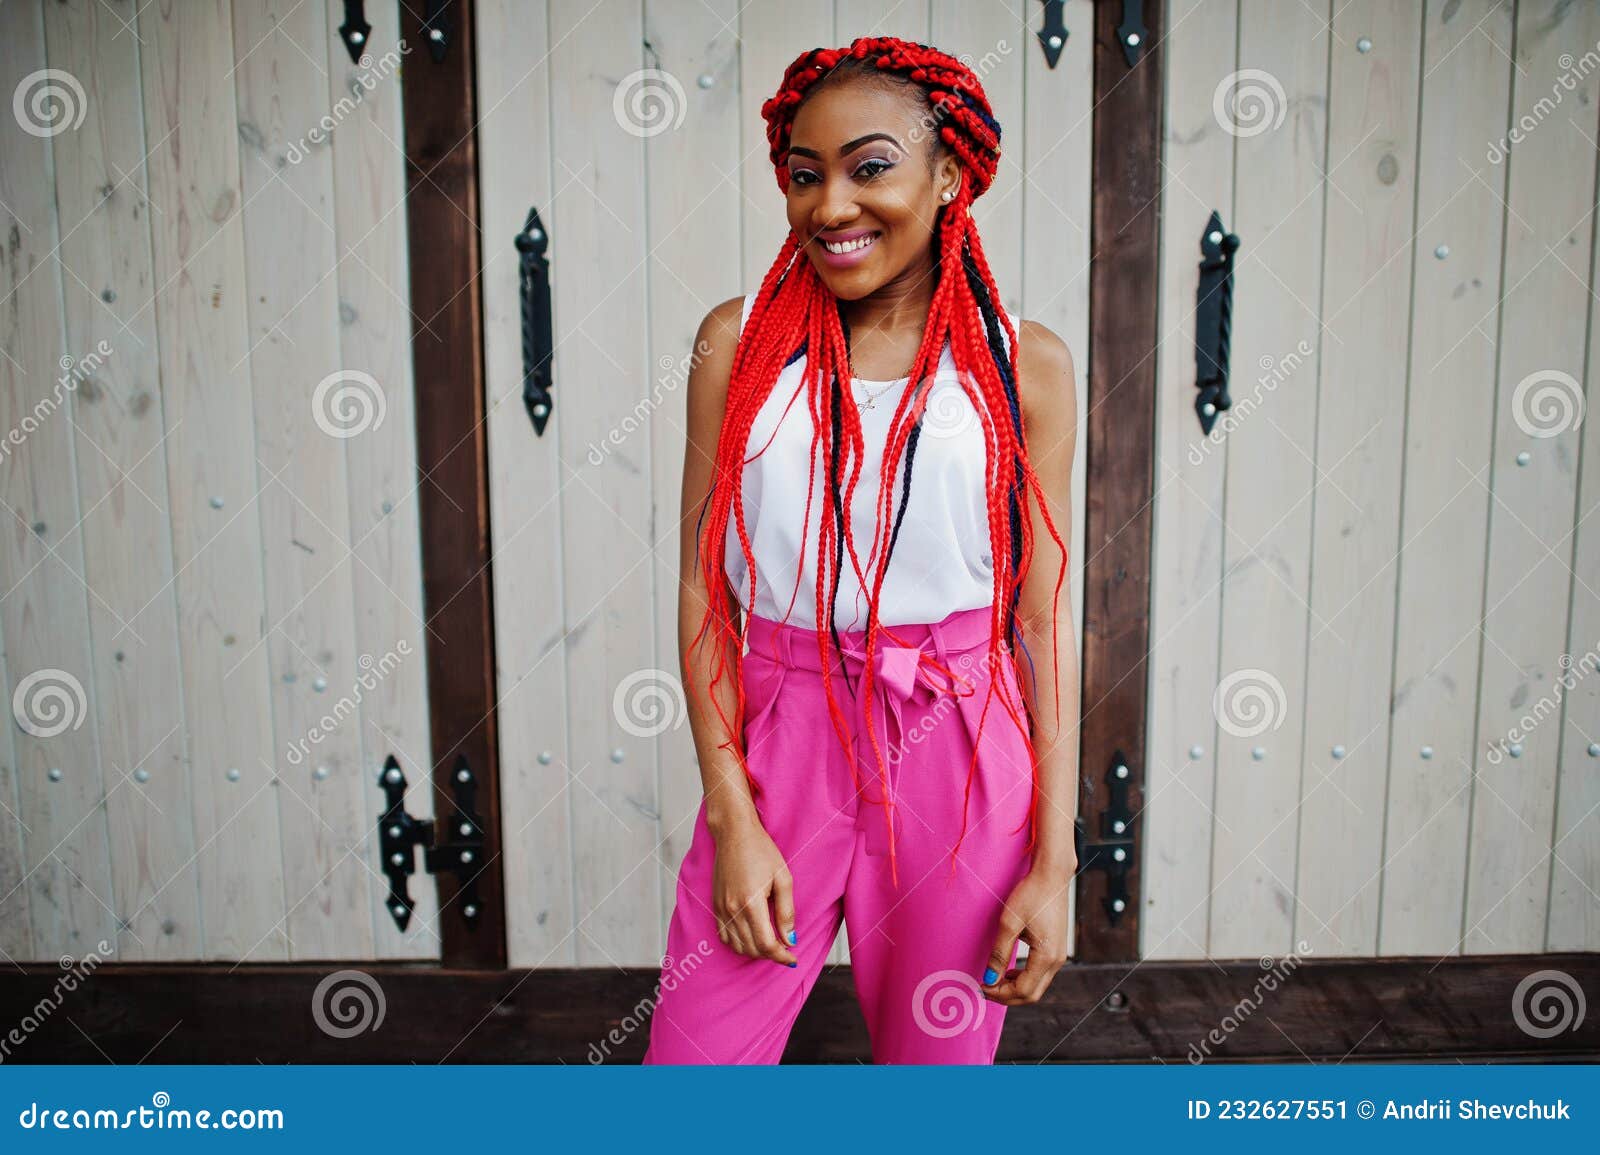 Fashionable African American Girl With Red Dreads Stock Image Image Of Female Lifestyle